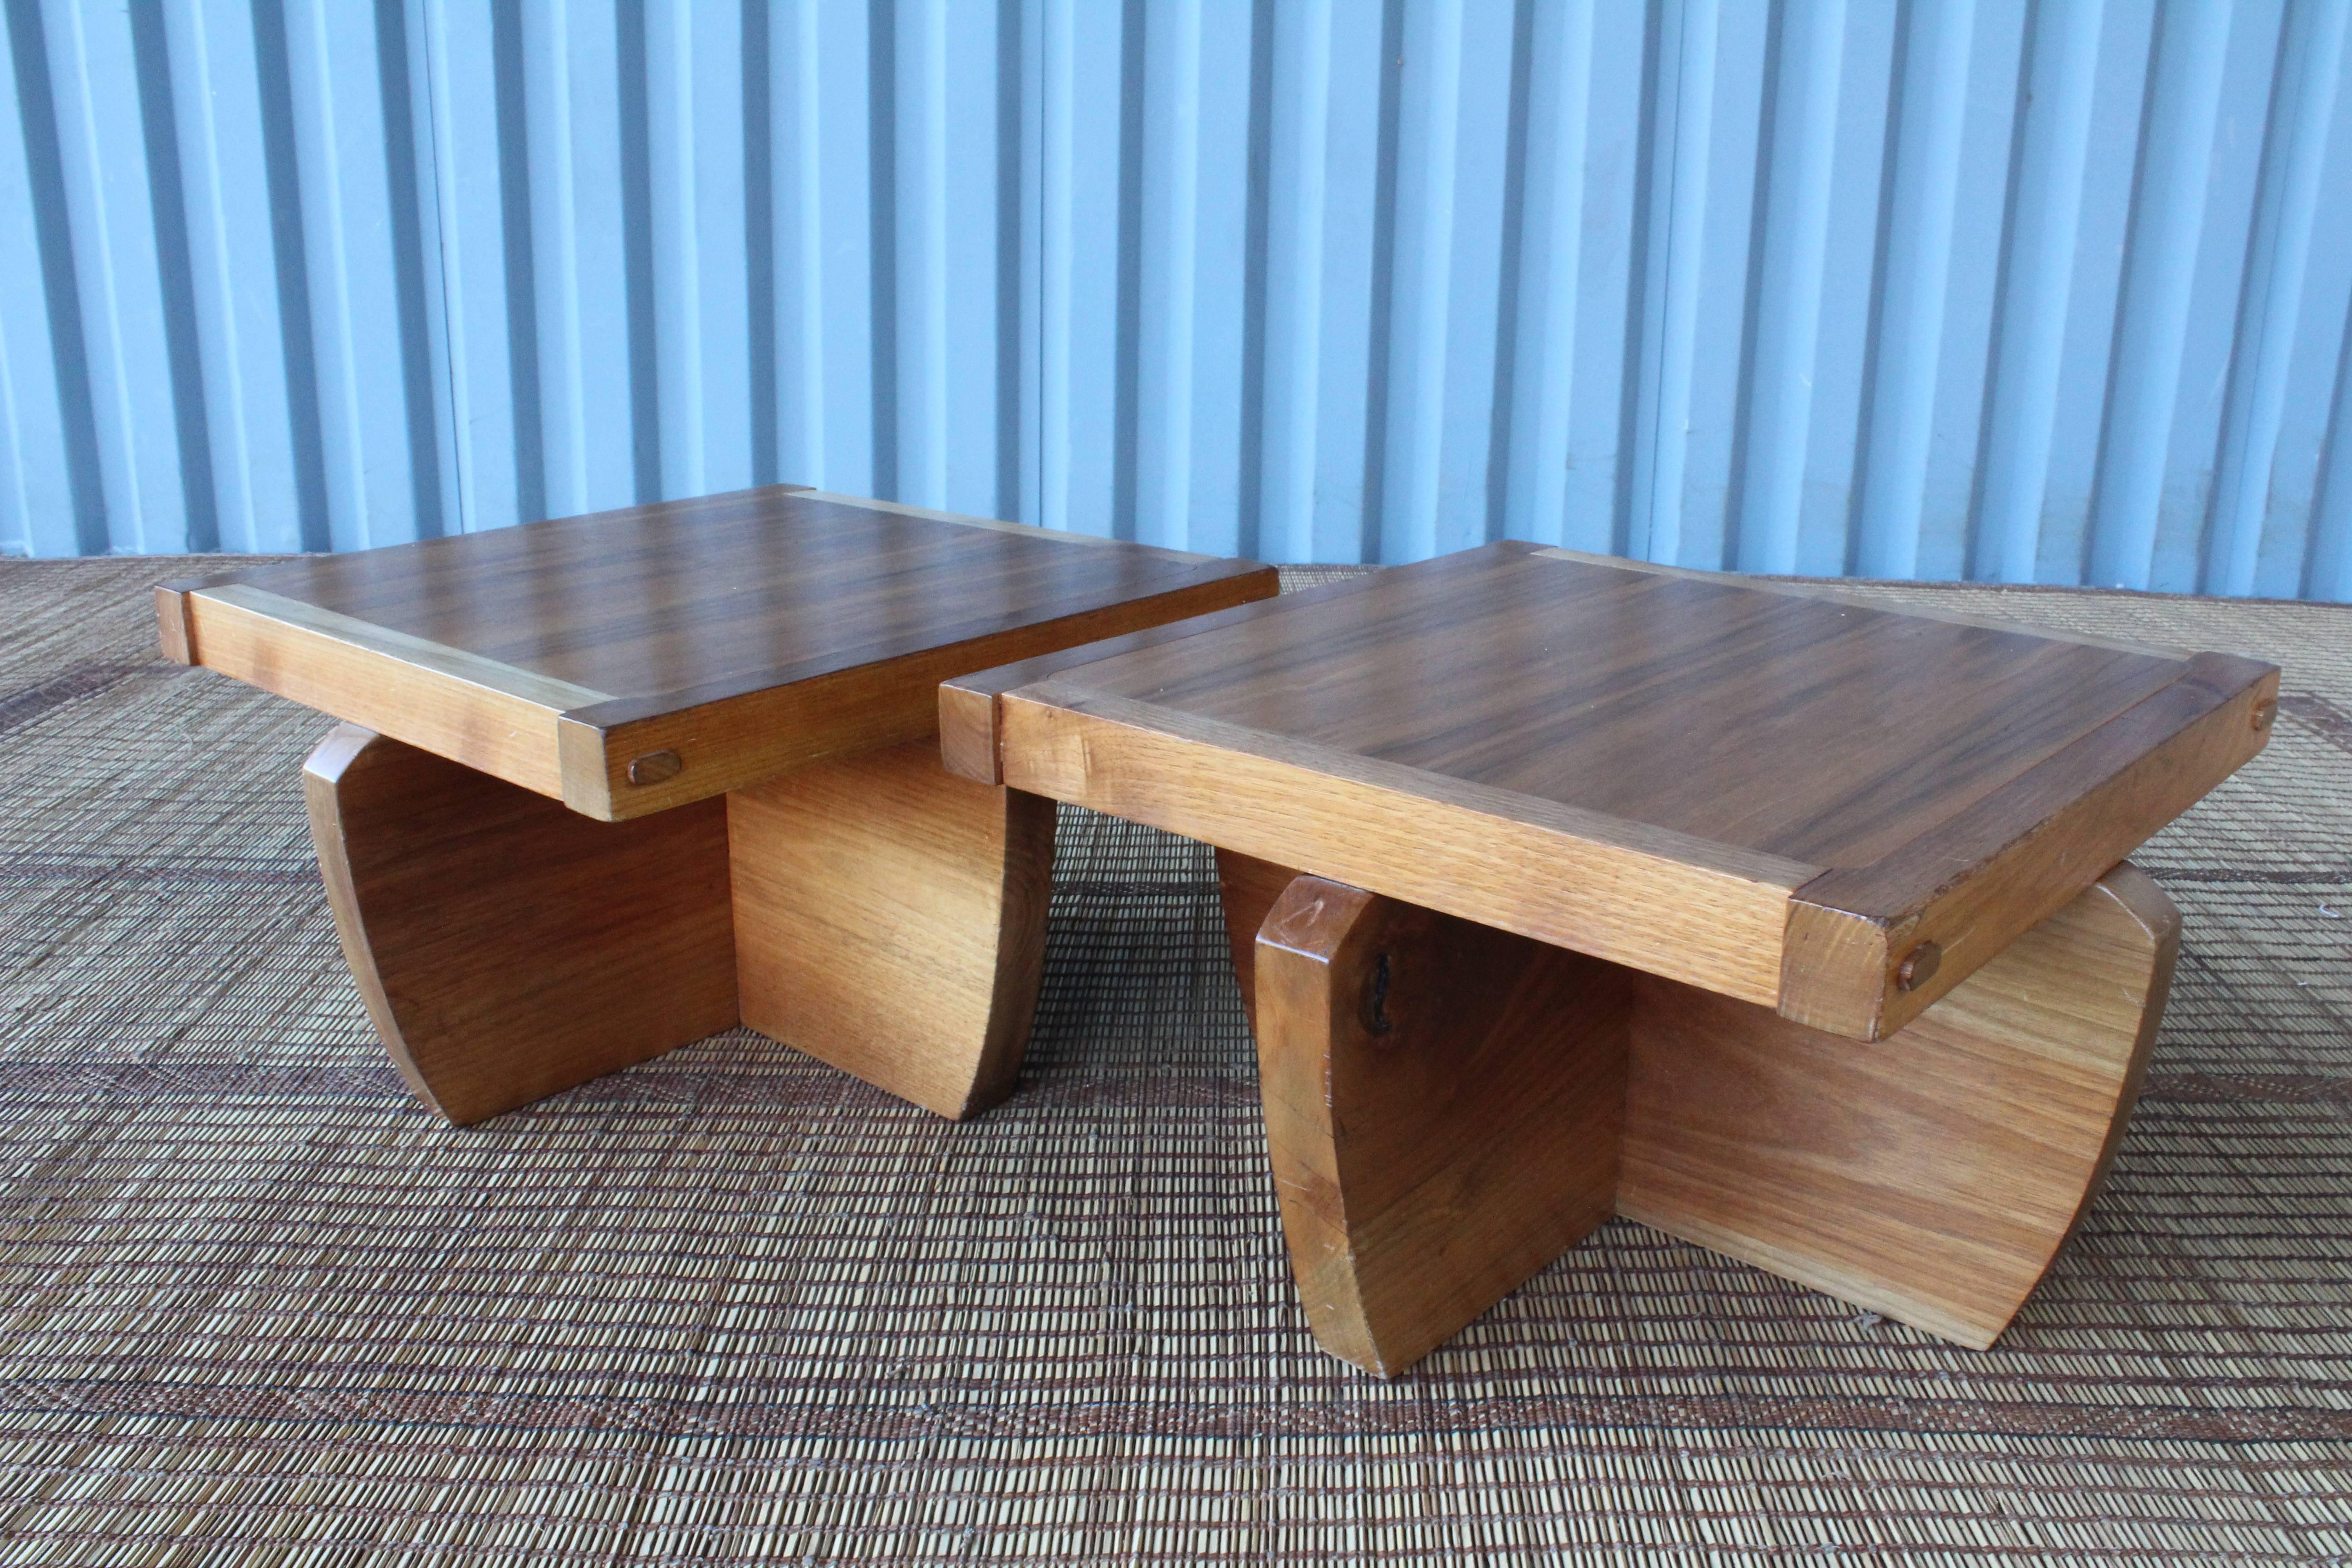 Pair of Stools in the Manner of George Nakashima 1